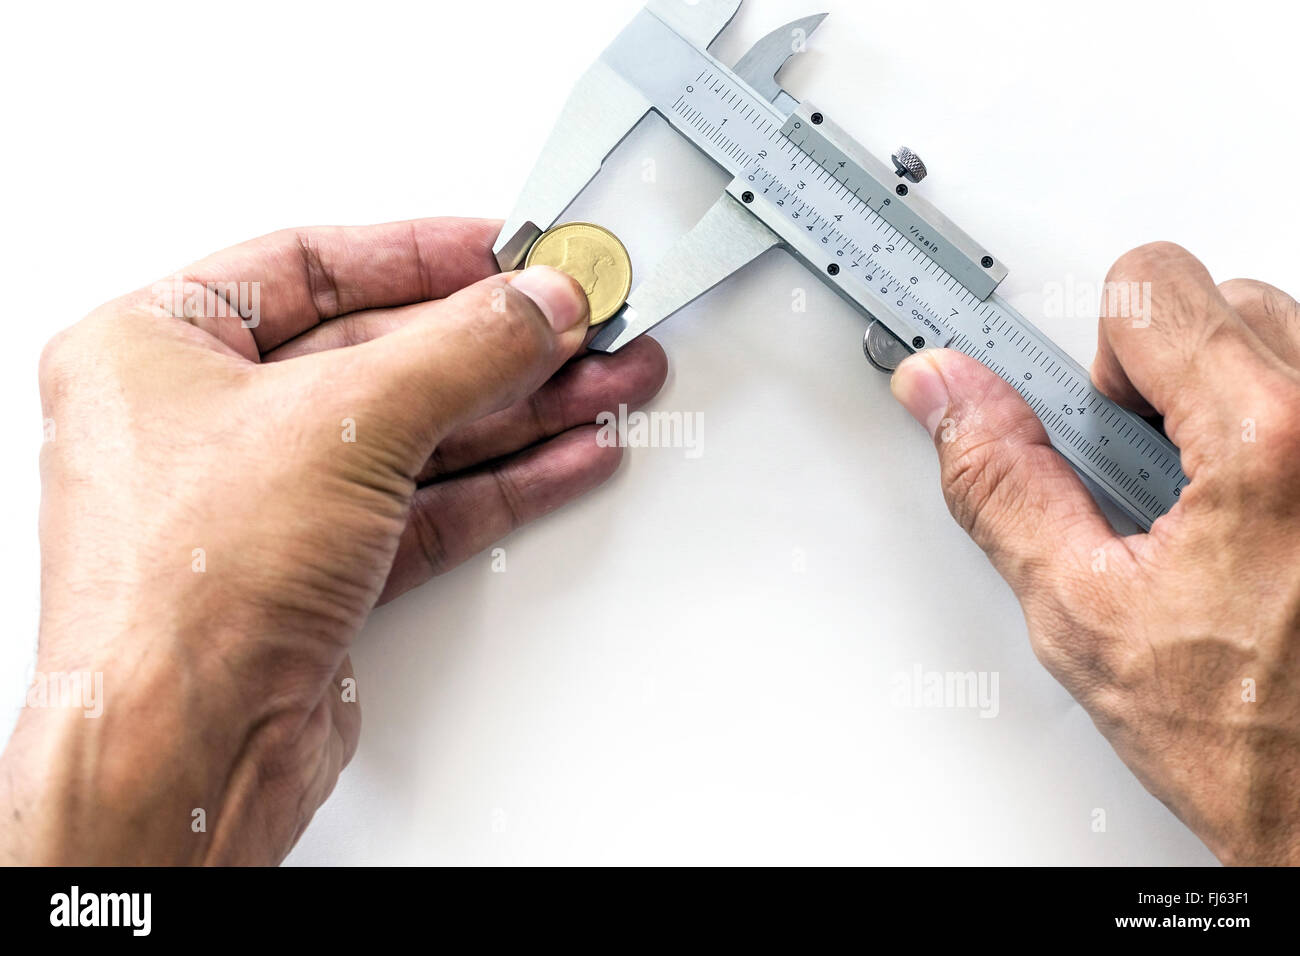 Vernier is a measure of the jobs and the industry is measured in centimeters and inches. Stock Photo